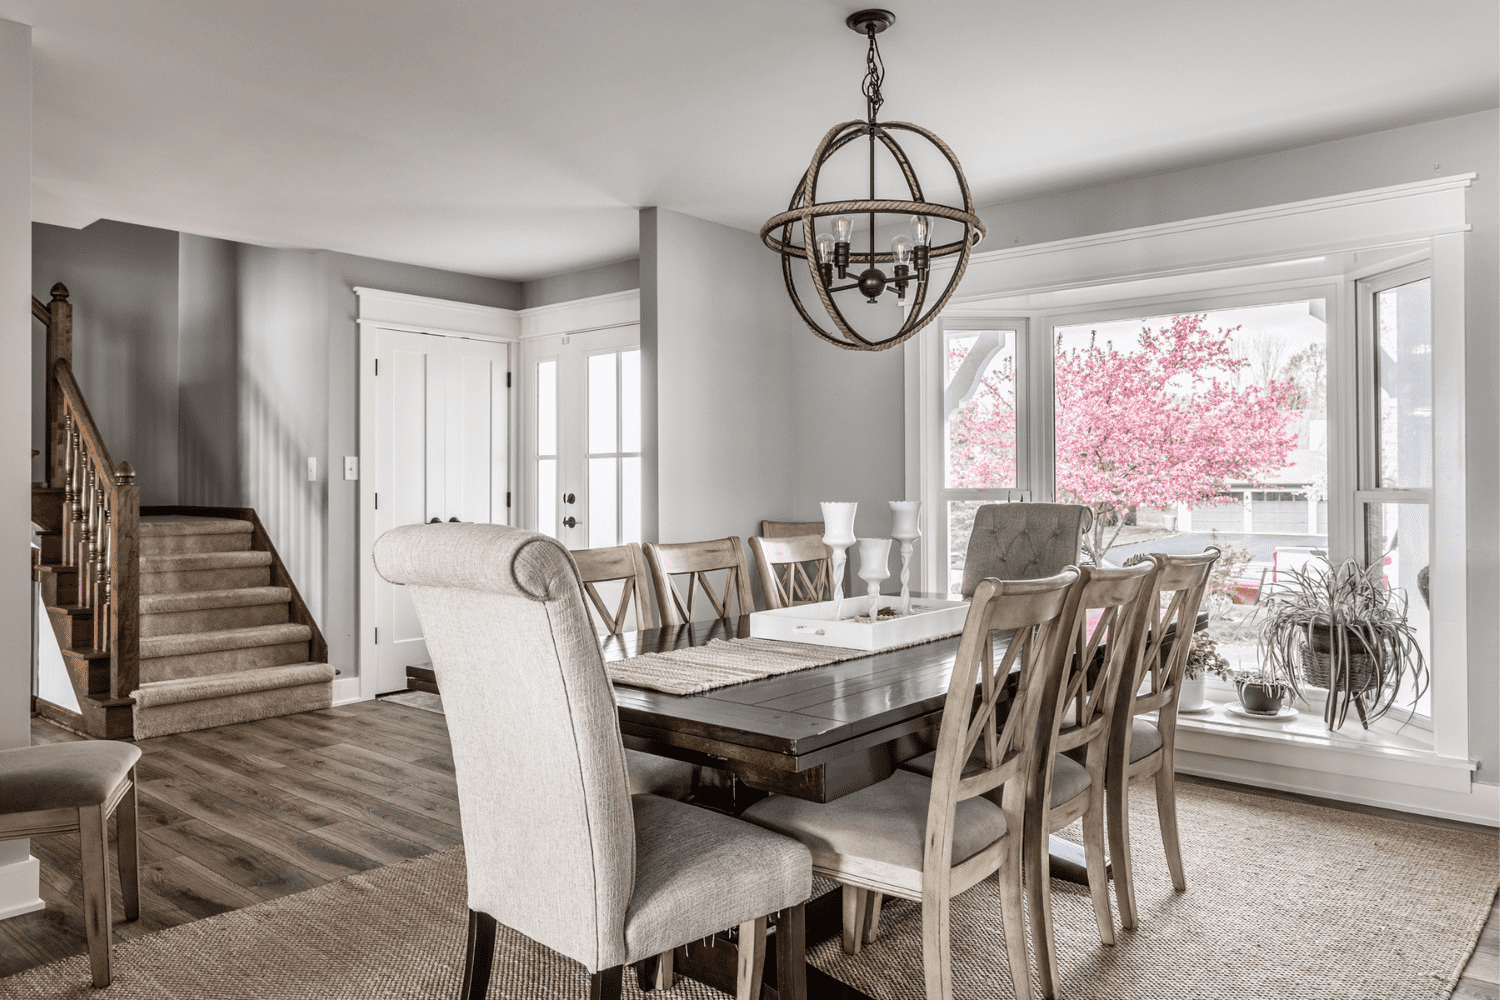 Nicholas Design Build | A dining room with a wooden table and chairs.